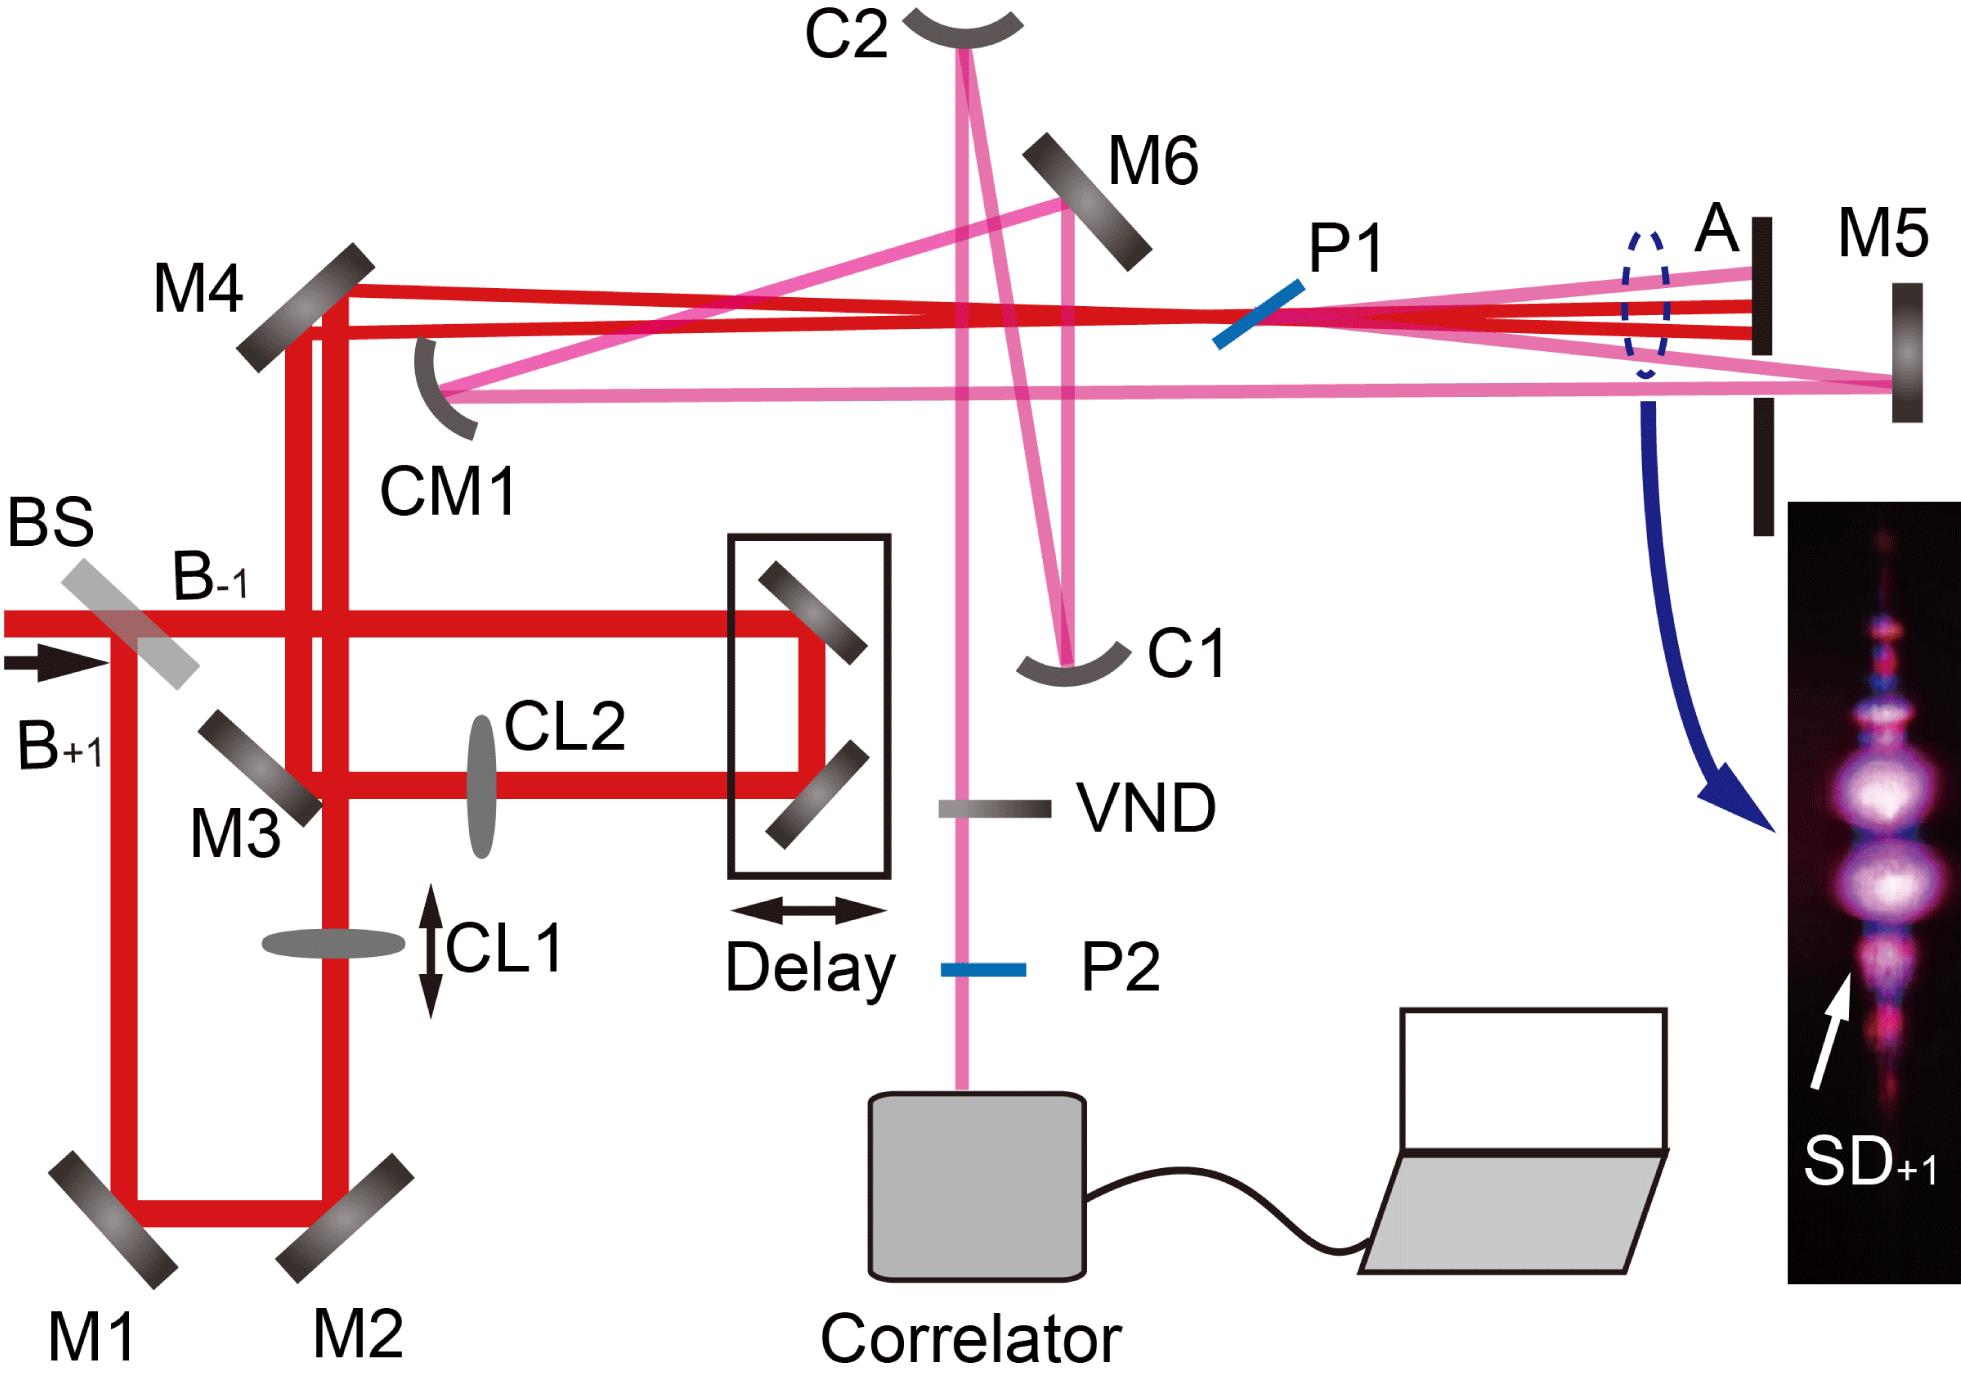 Experimental setup for self-diffraction signal generation and temporal contrast measurement. BS: beam splitter; M1–M6: reflective mirrors; CL1, CL2: plane-convex cylindrical lenses, mm; P1: 0.15 mm thick fused silica plate; A: aperture; CM1: cylindrical reflective mirror, mm; C1: spherical concave reflective mirror, mm; C2: spherical convex reflective mirror, mm; VND: 2 mm thick variable neutral-density filter; P2: 1 mm thick fused silica plate; correlator: third-order cross-correlator (Amplitude Technologies Inc., Sequia 800).